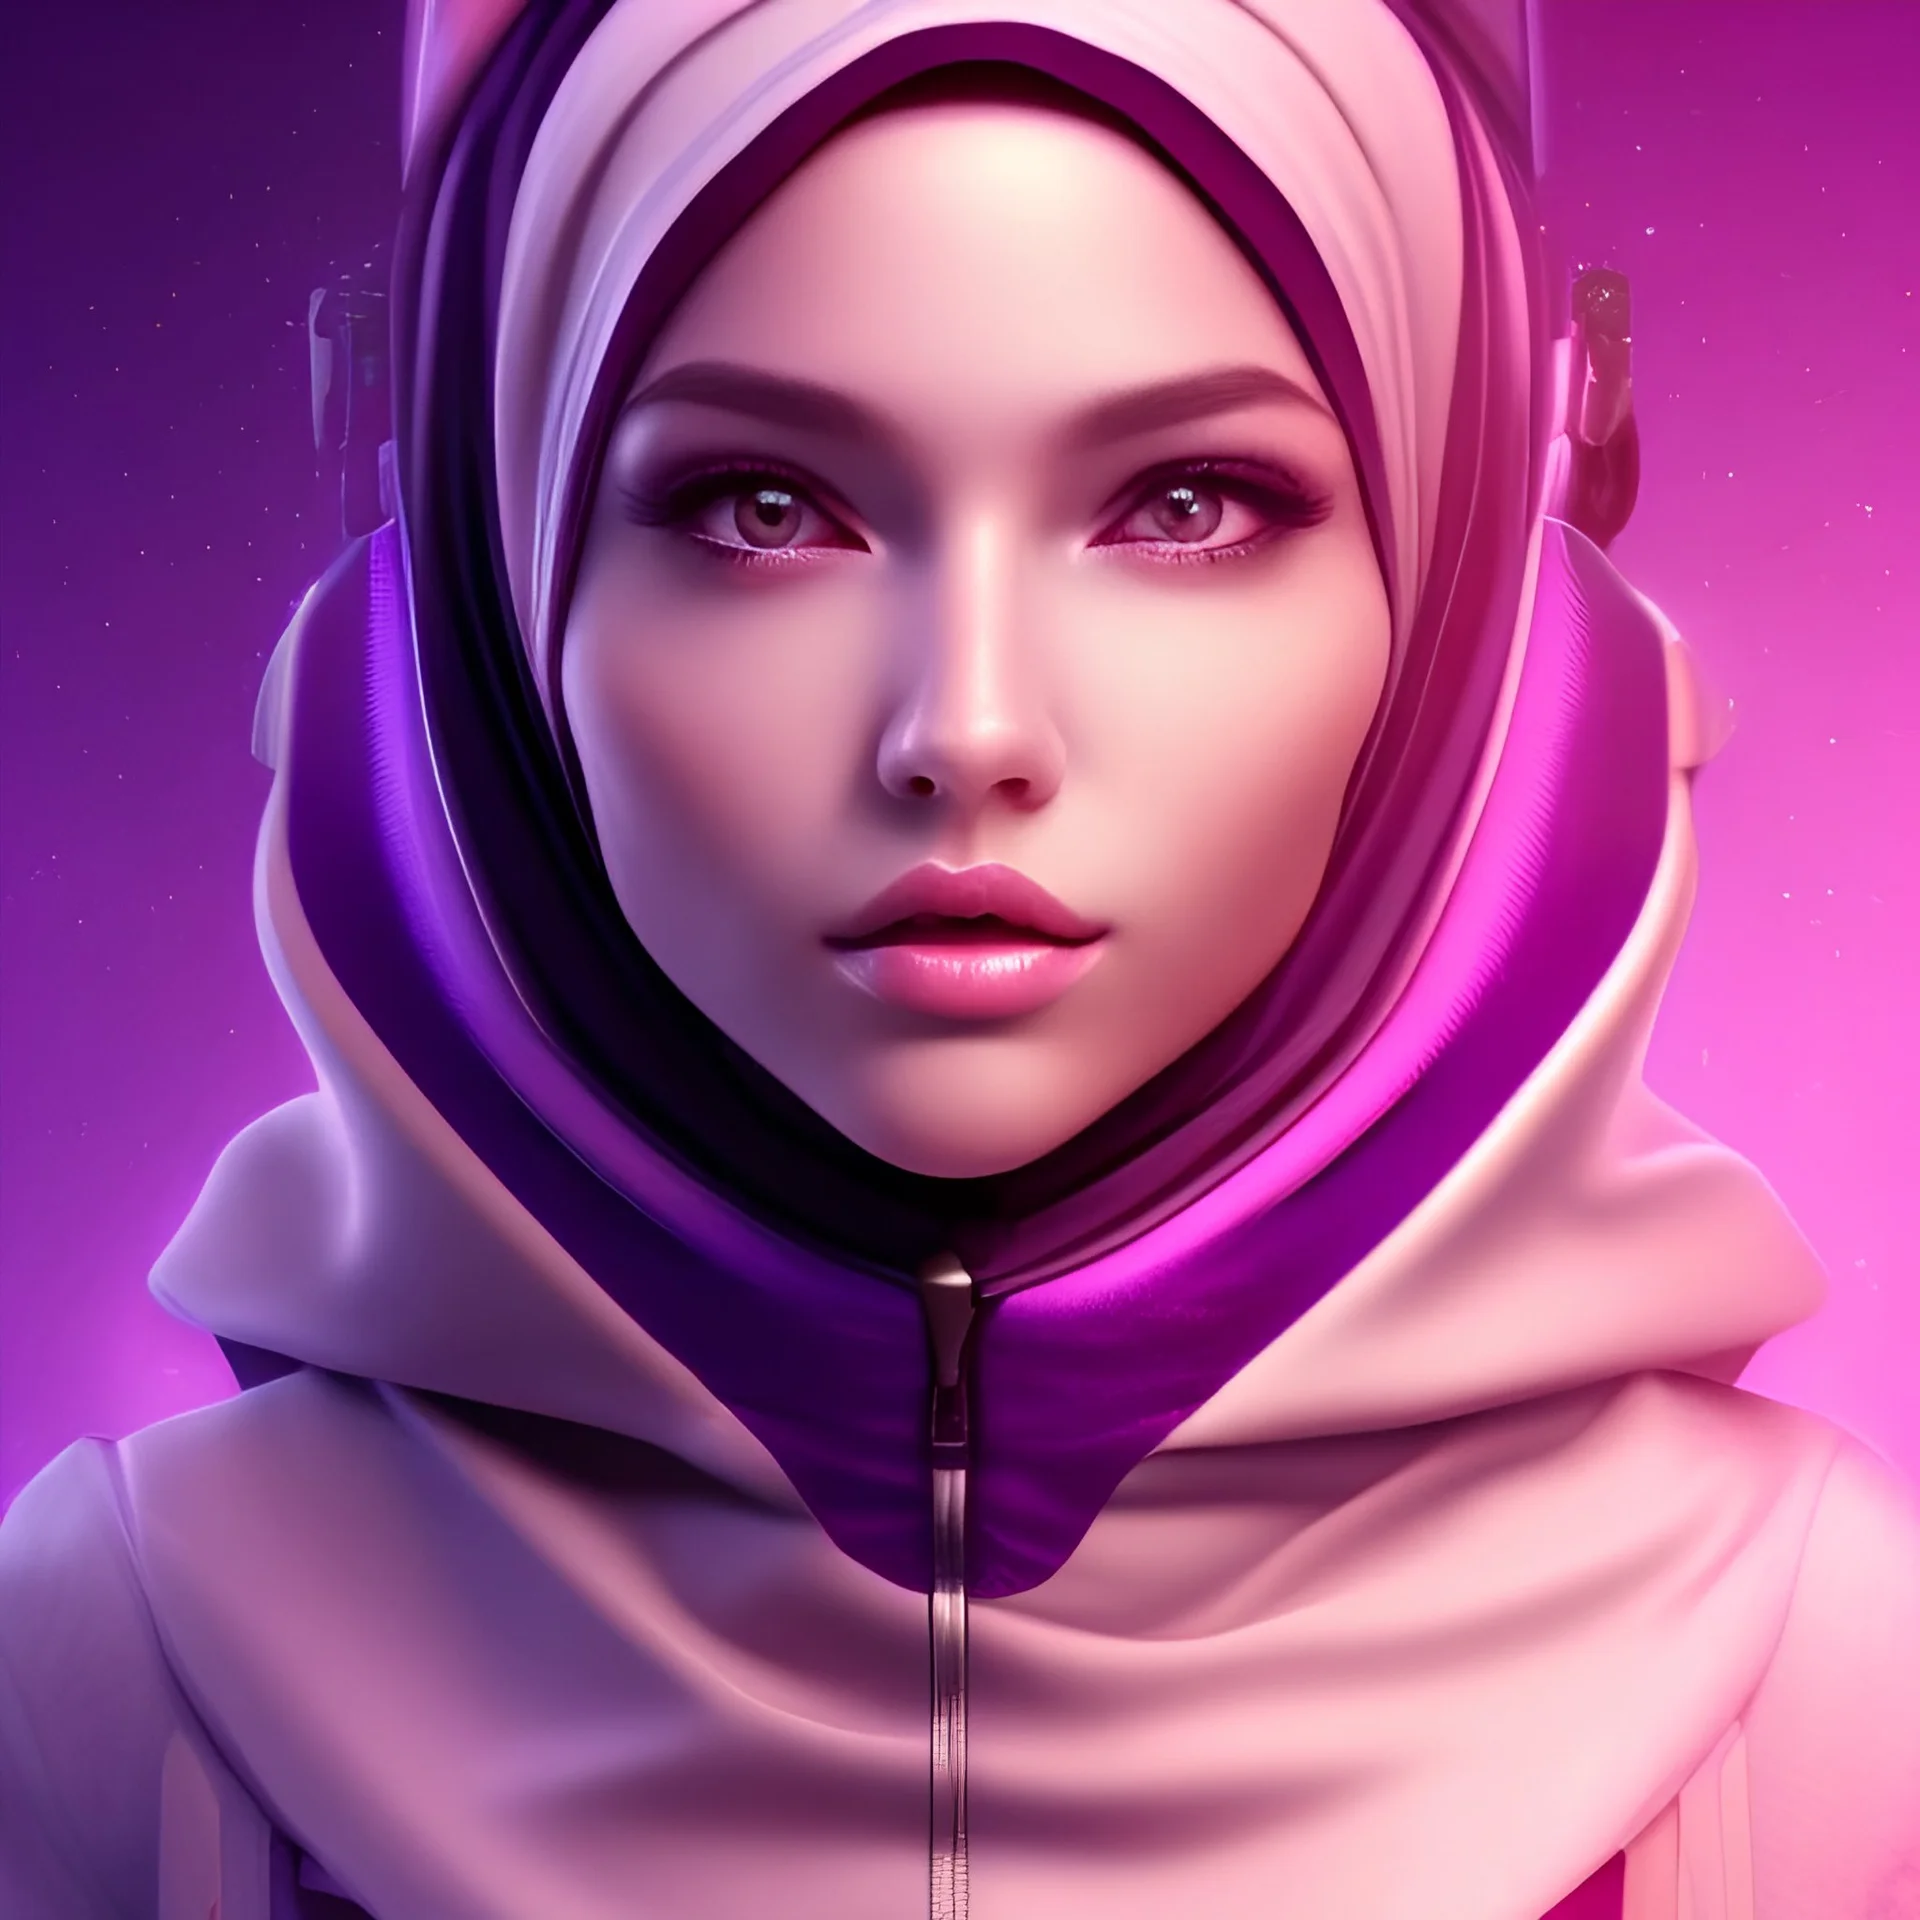 Cute girl face in hijab, Sci-fi character, purple backlight, pink and purple, scifi suit, profile, purple background, pink lighting